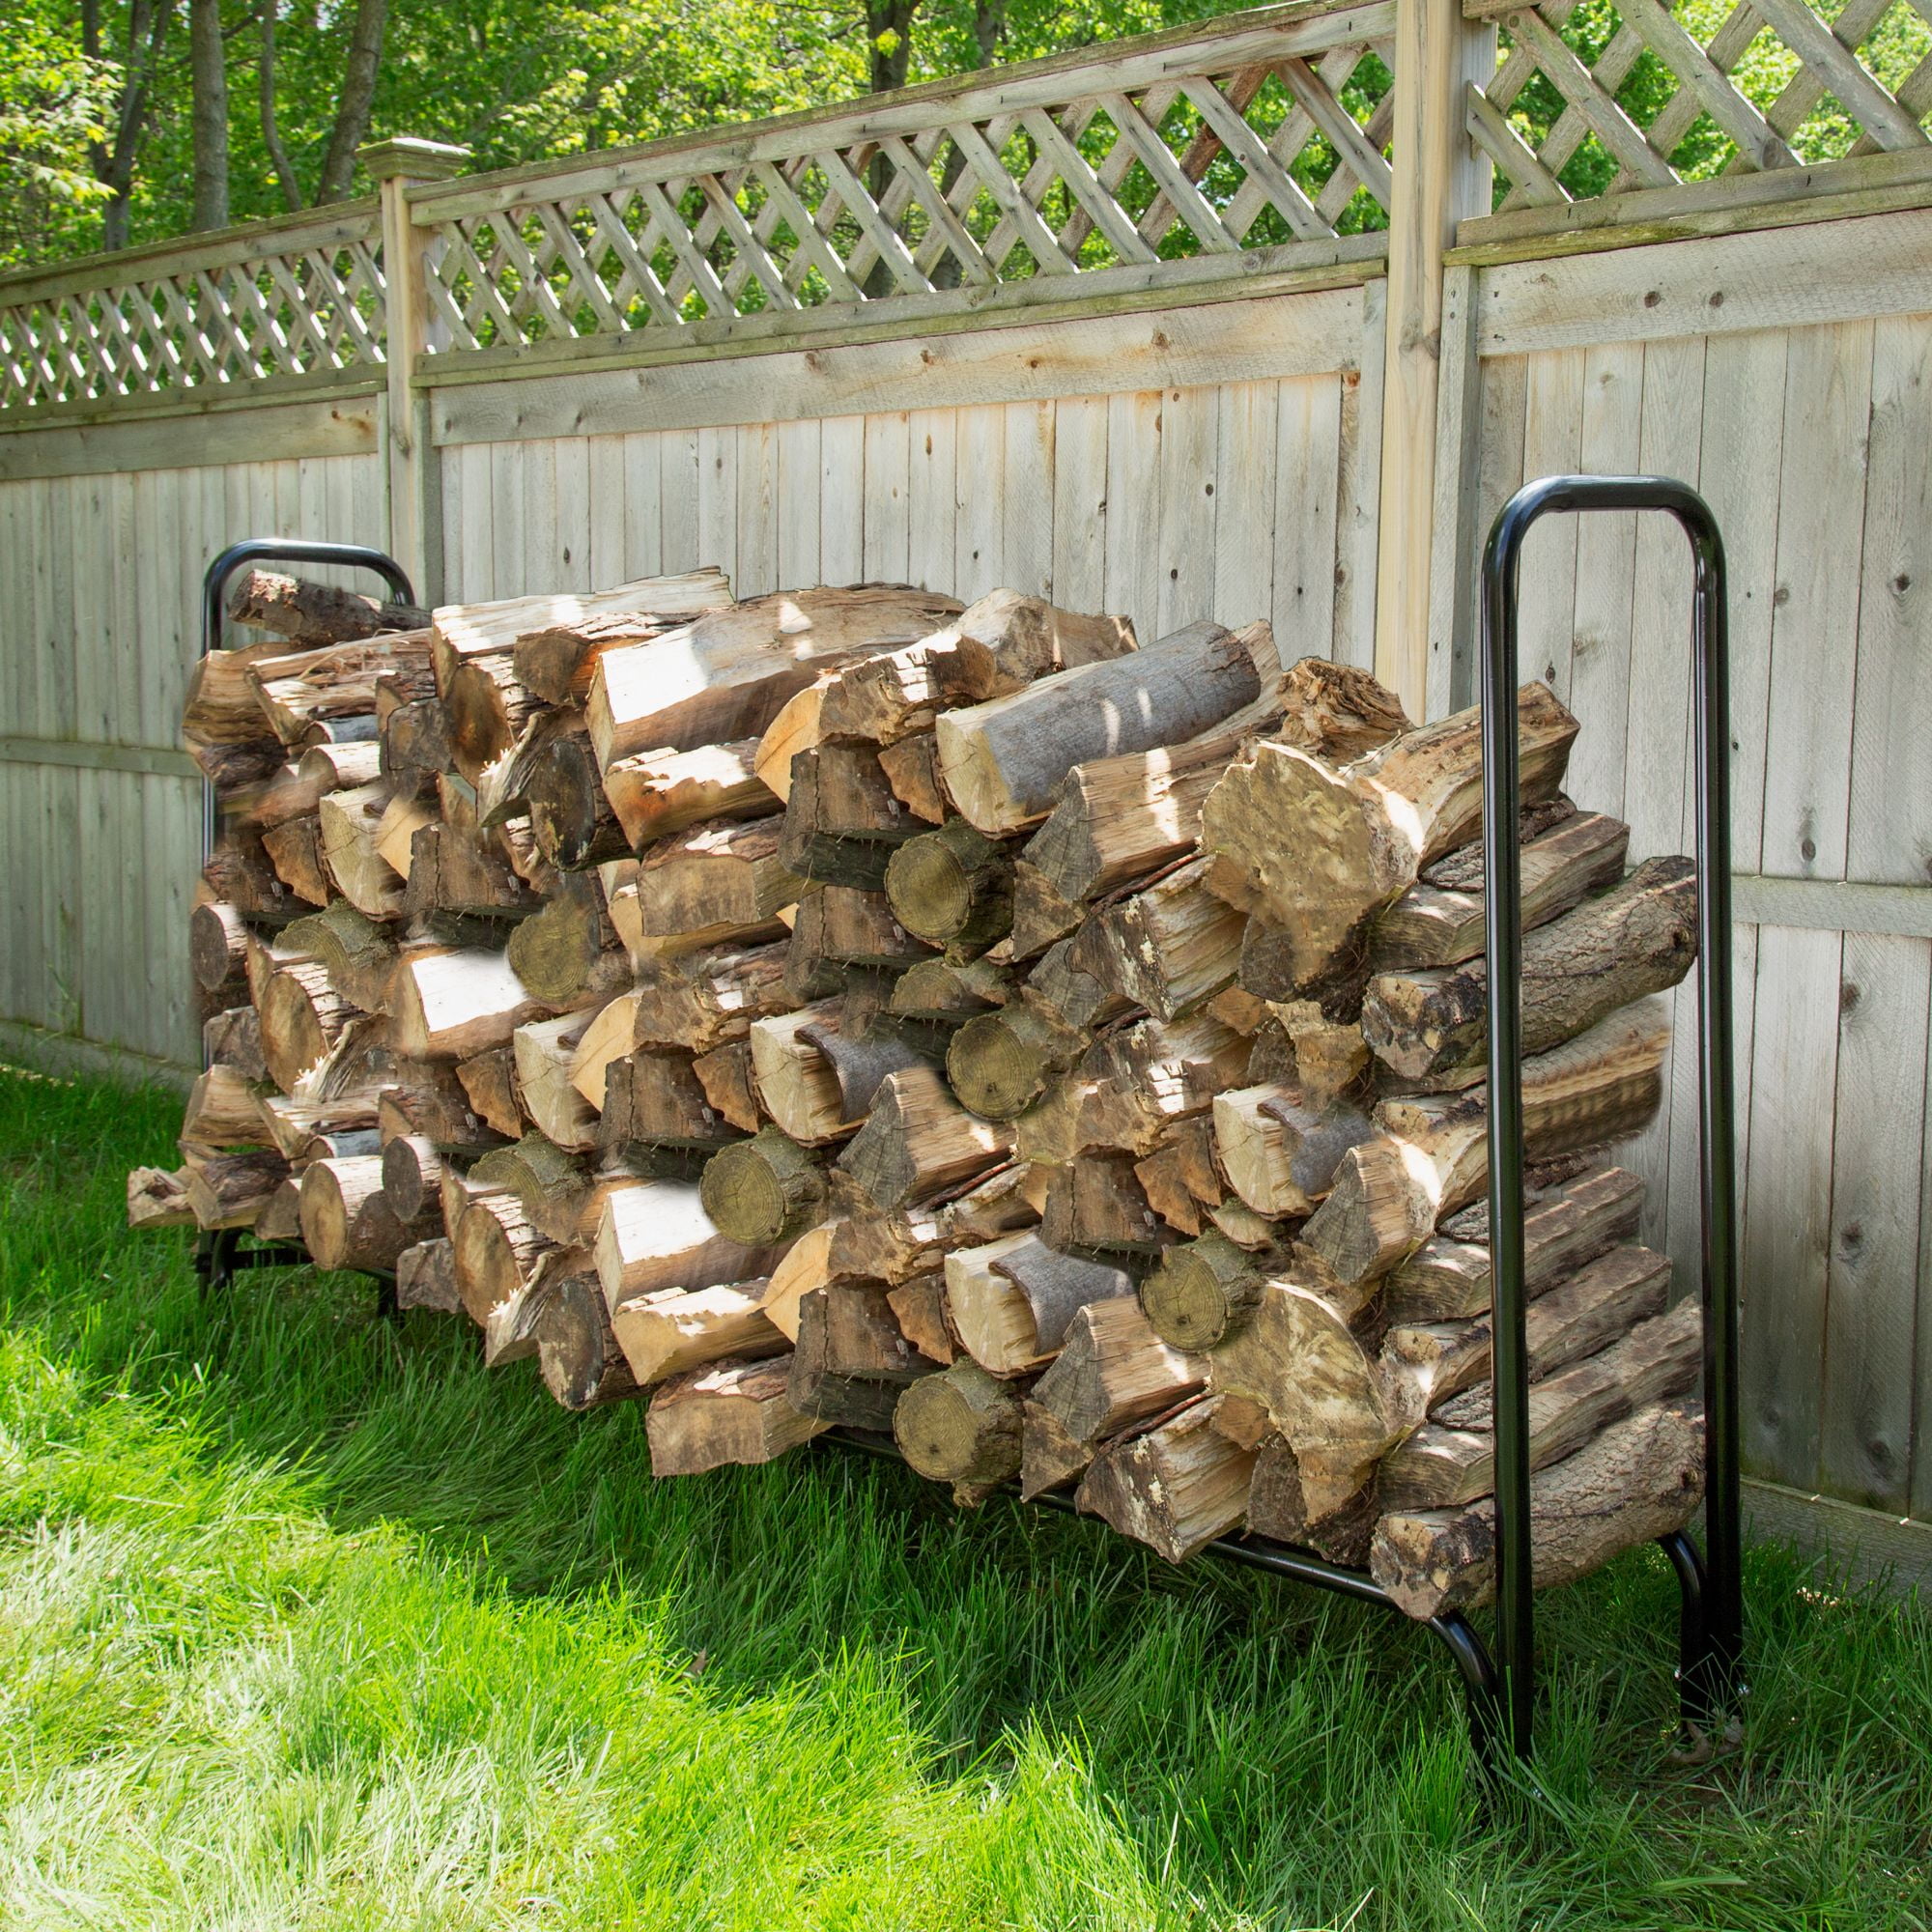 8-ft Firewood Rack Outdoor w/ Cover Fire Wood Log Storage Rack